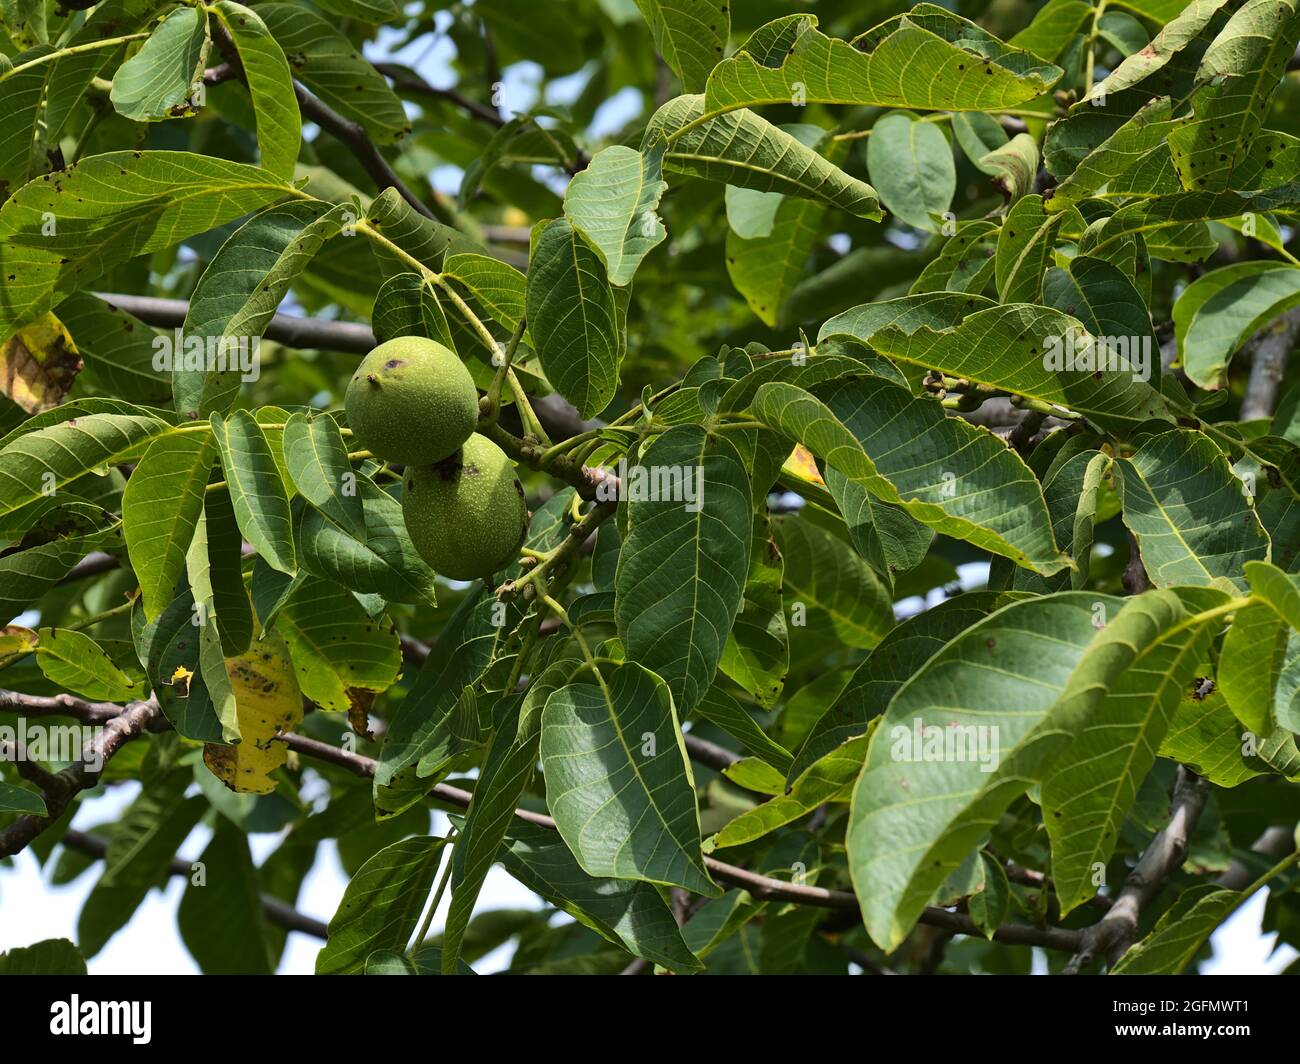 Close-up view of a juglans regia tree, also called Persian, English or Carpathian walnut, with branches, green fruits and leaves at Limburg hill. Stock Photo